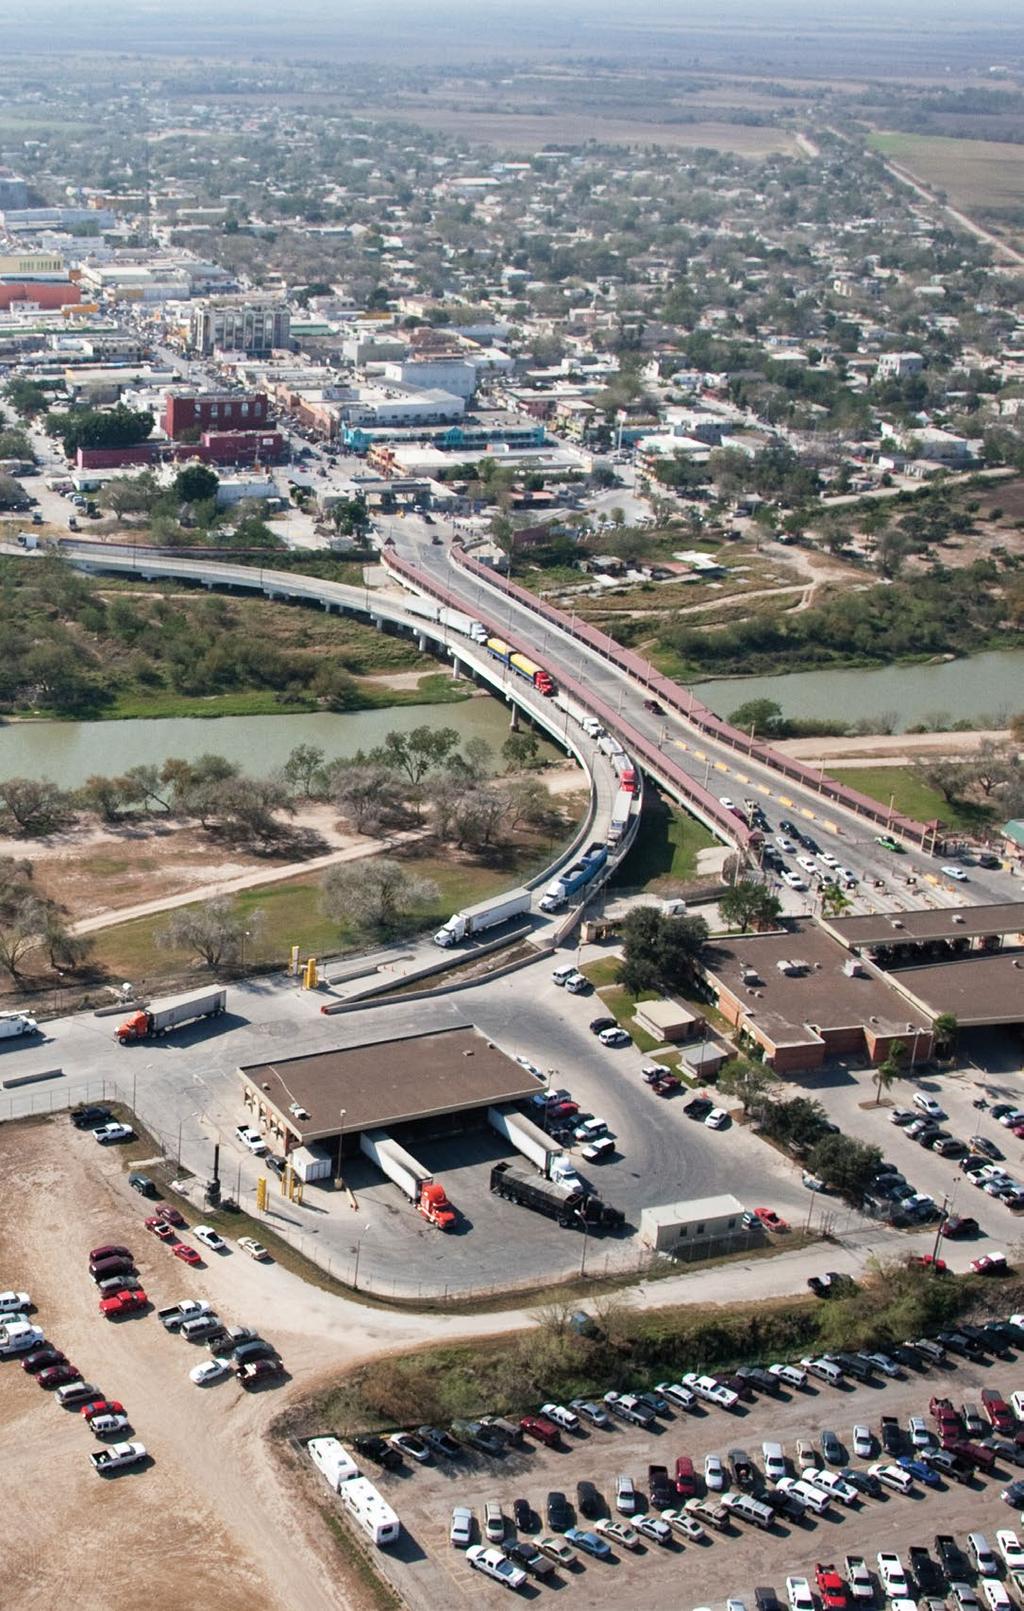 GATEWAY TO MEXICO McAllen is located in the heart of the Rio Grande Valley of South Texas only five miles from the US/Mexico border.